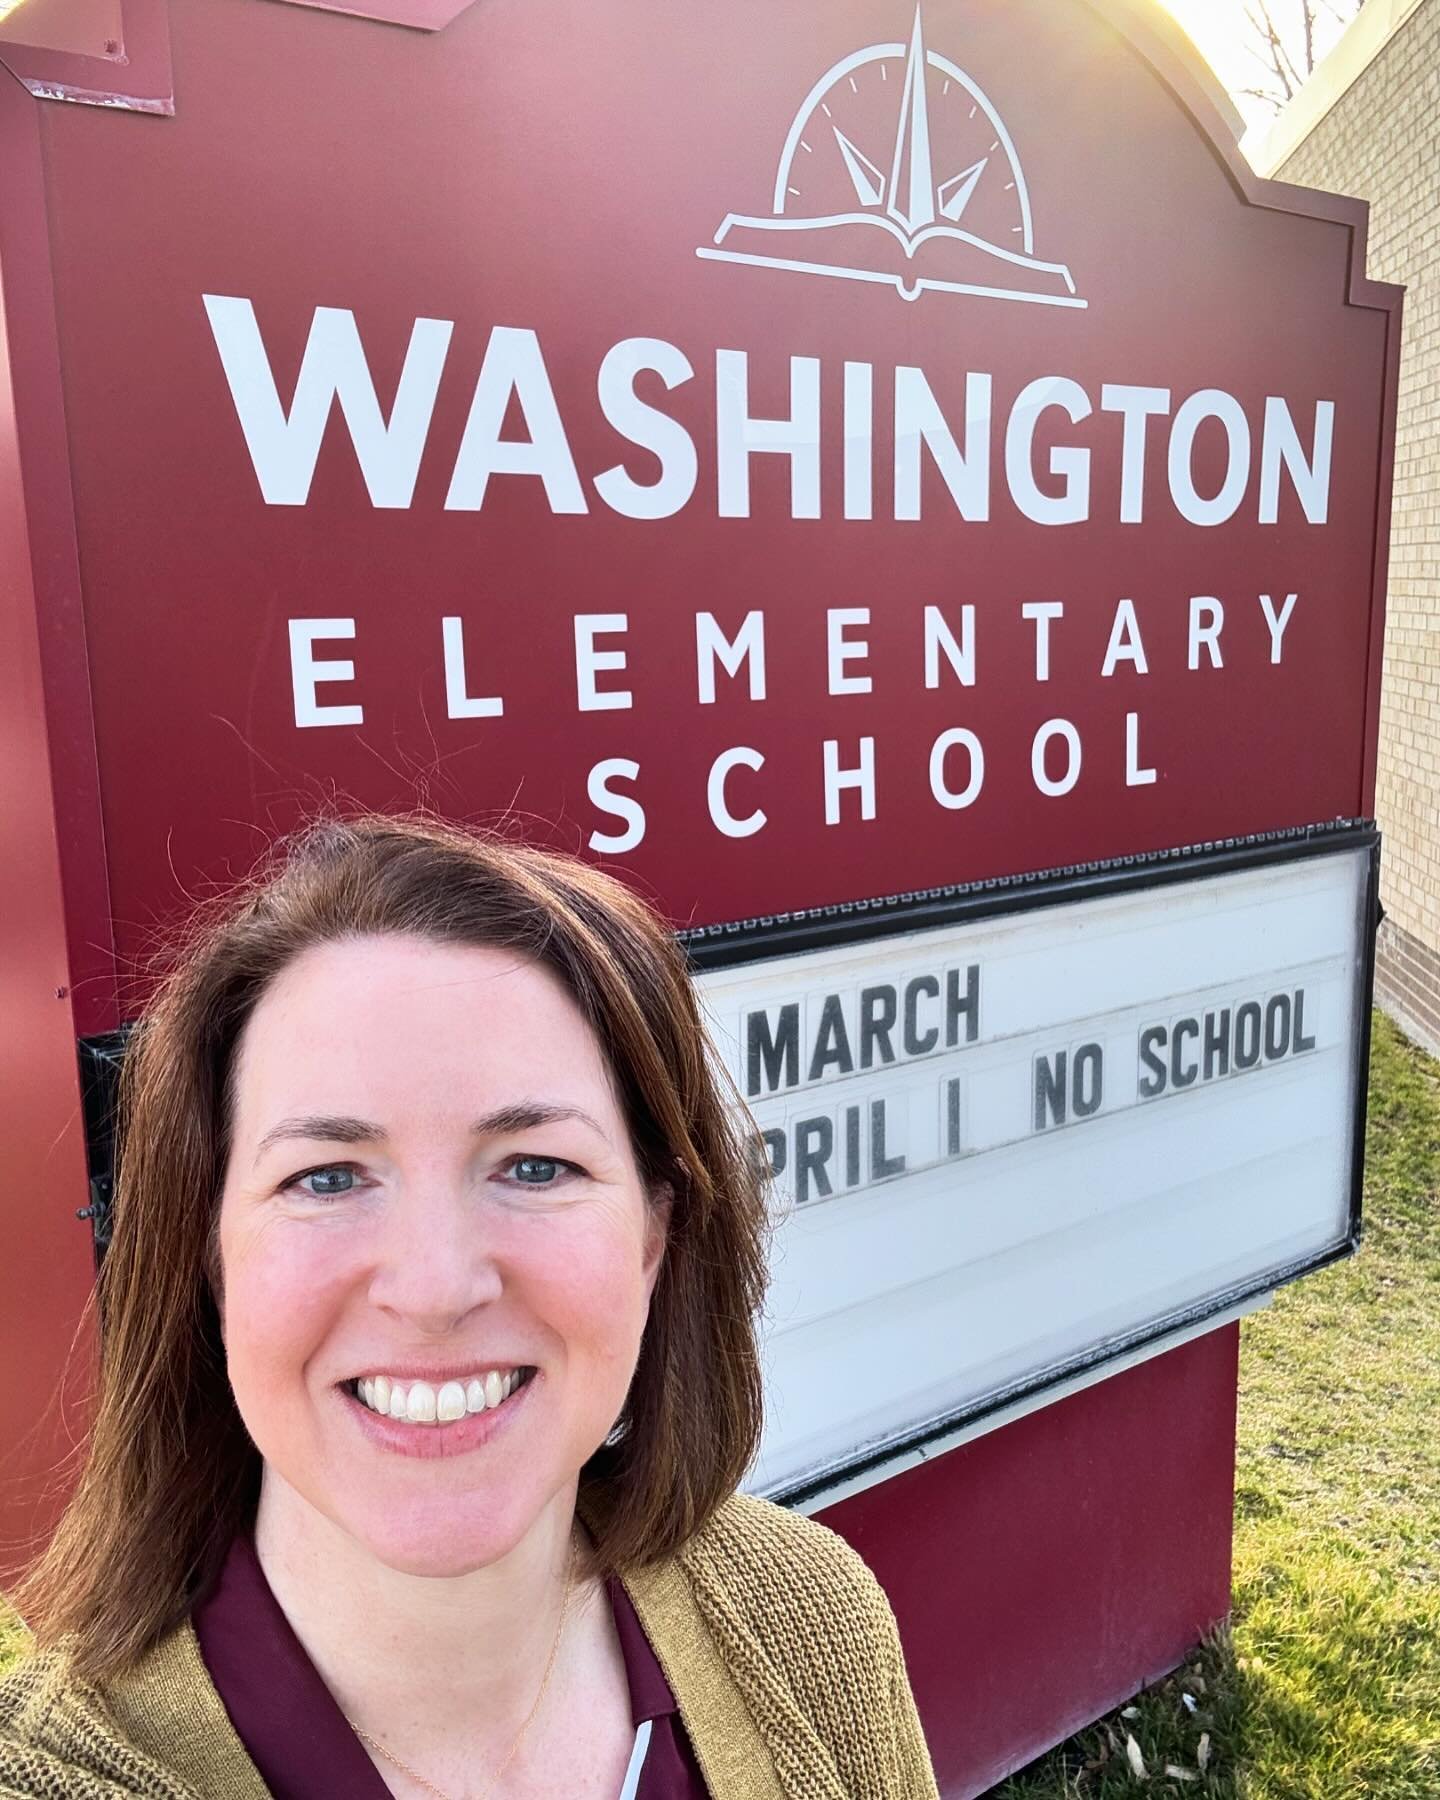 I started my day off today with a visit to Washington Elementary School. Their school day begins with Morning Meeting, which included the pledge of allegiance, singing &ldquo;You&rsquo;re a Grand Old Flag&rdquo; and reciting the Panther Pledge this m